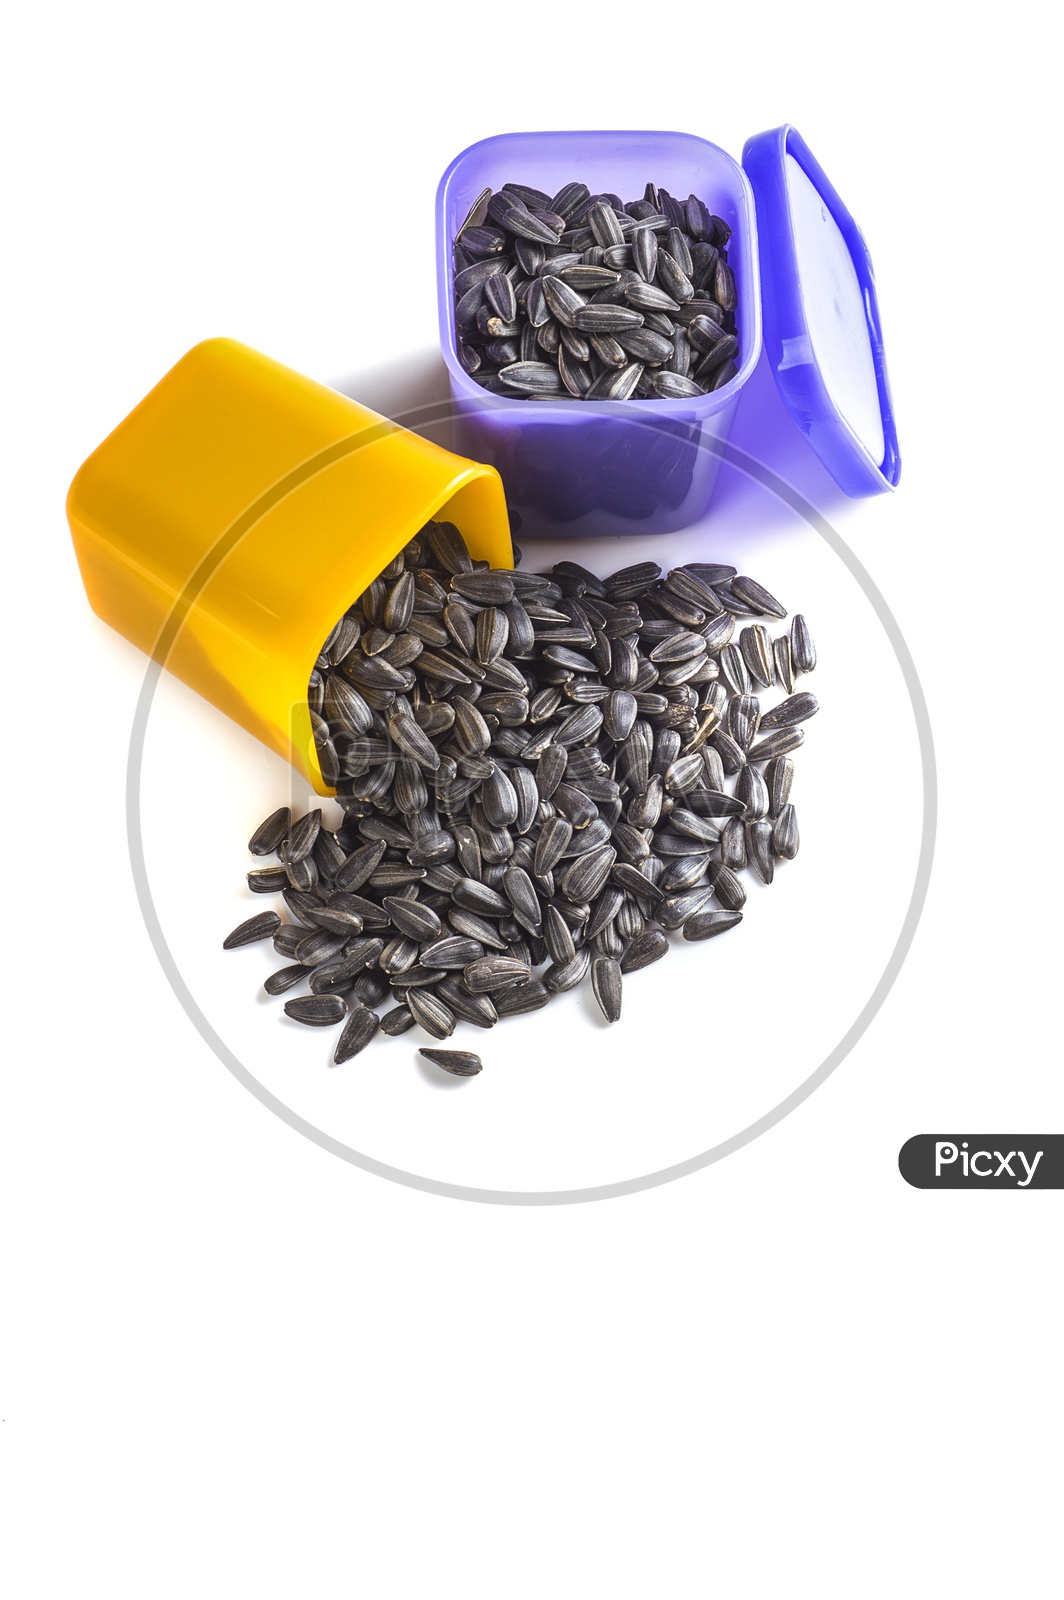 Sunflower seeds in plastic jars on a isolated white background